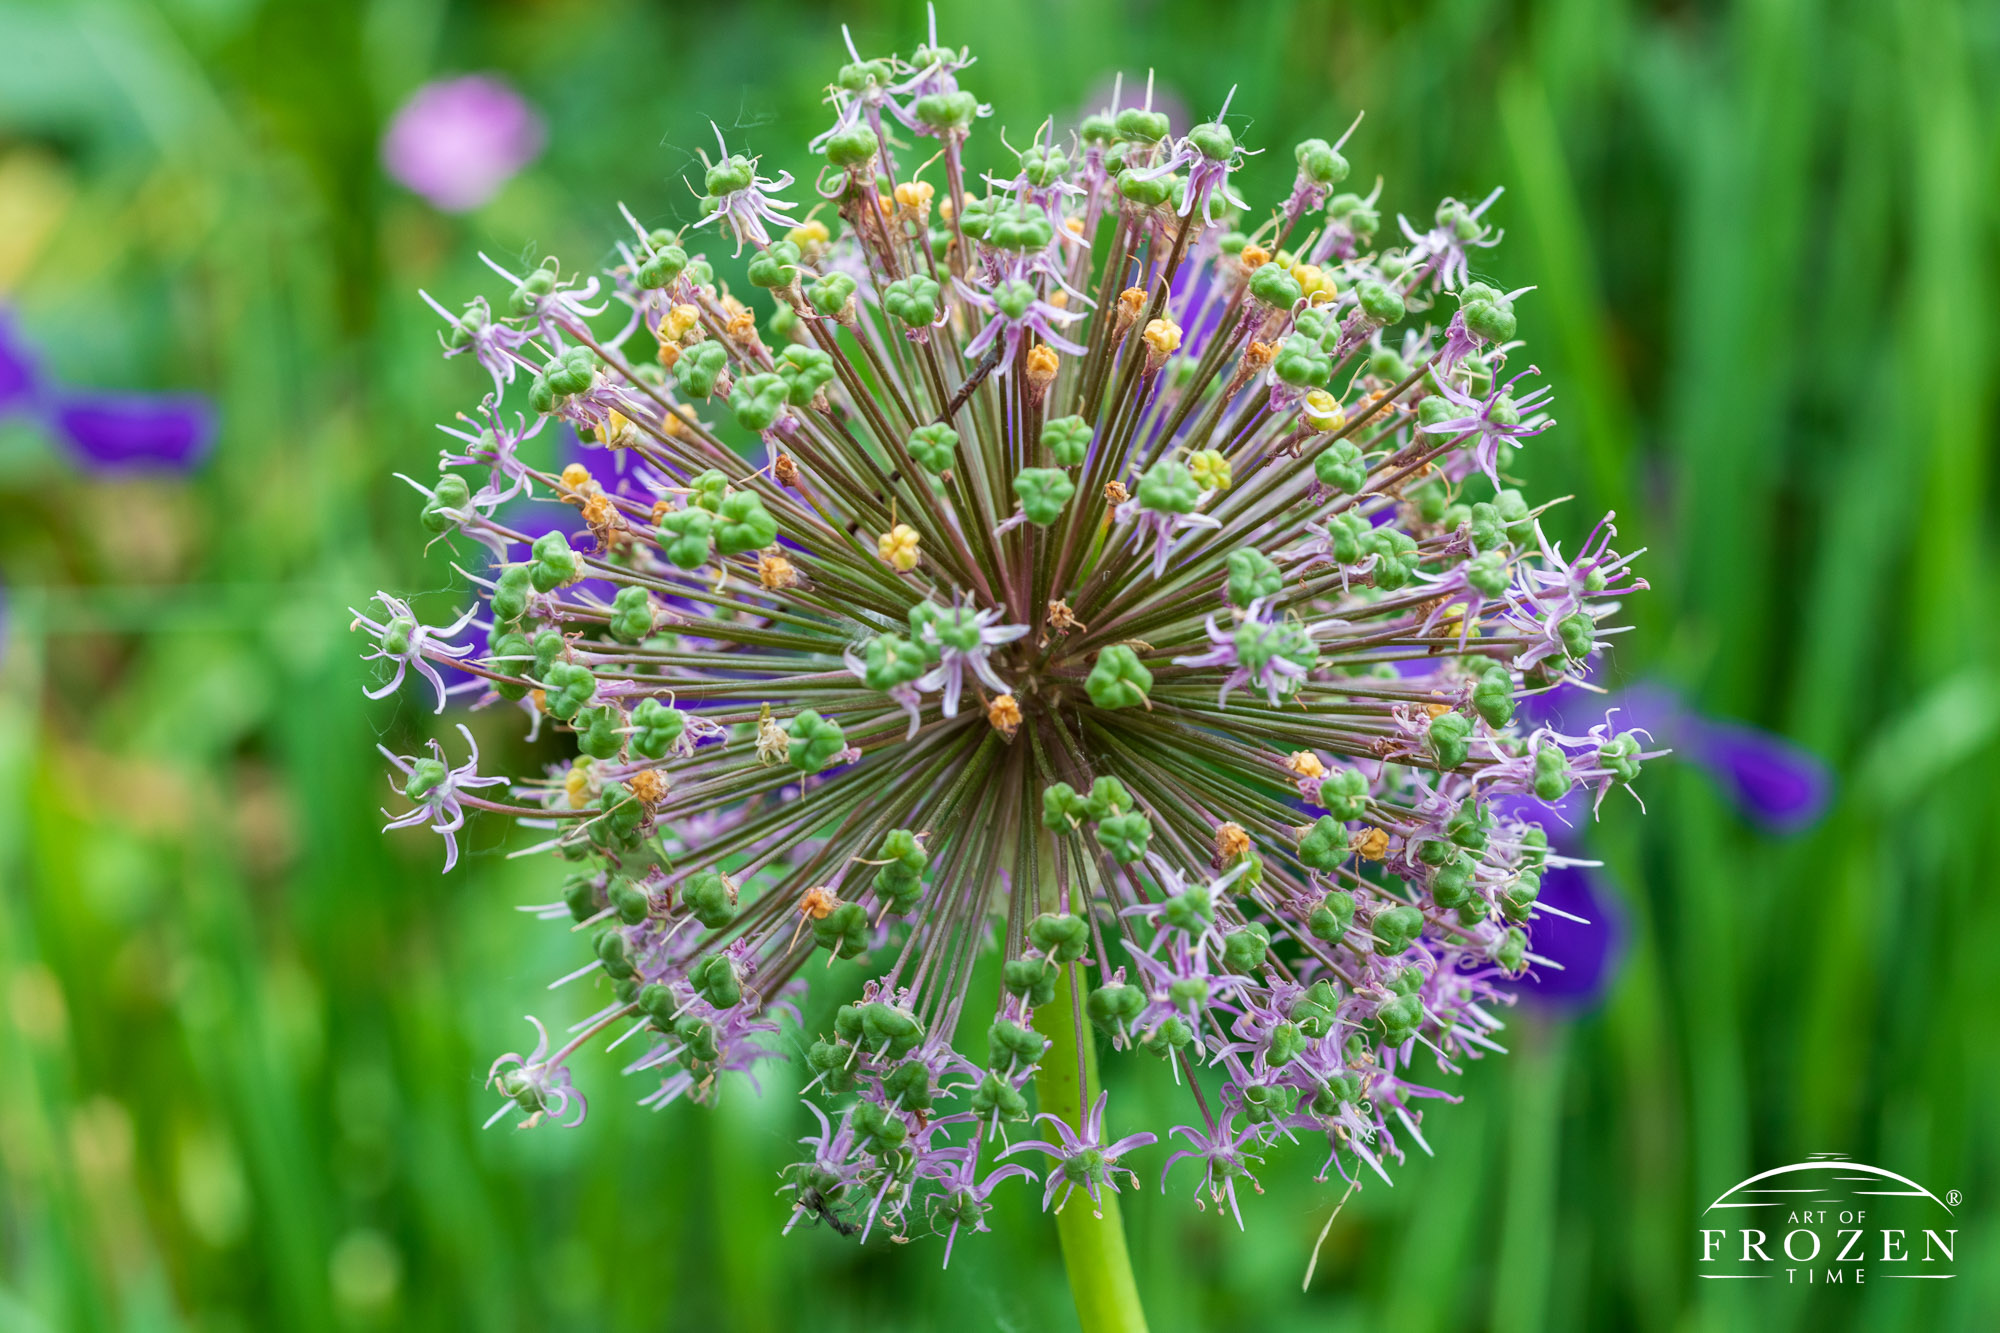 An intimate view of the Allium Globemaster in Wegerzyn Gardens MetroPark which is about to bloom